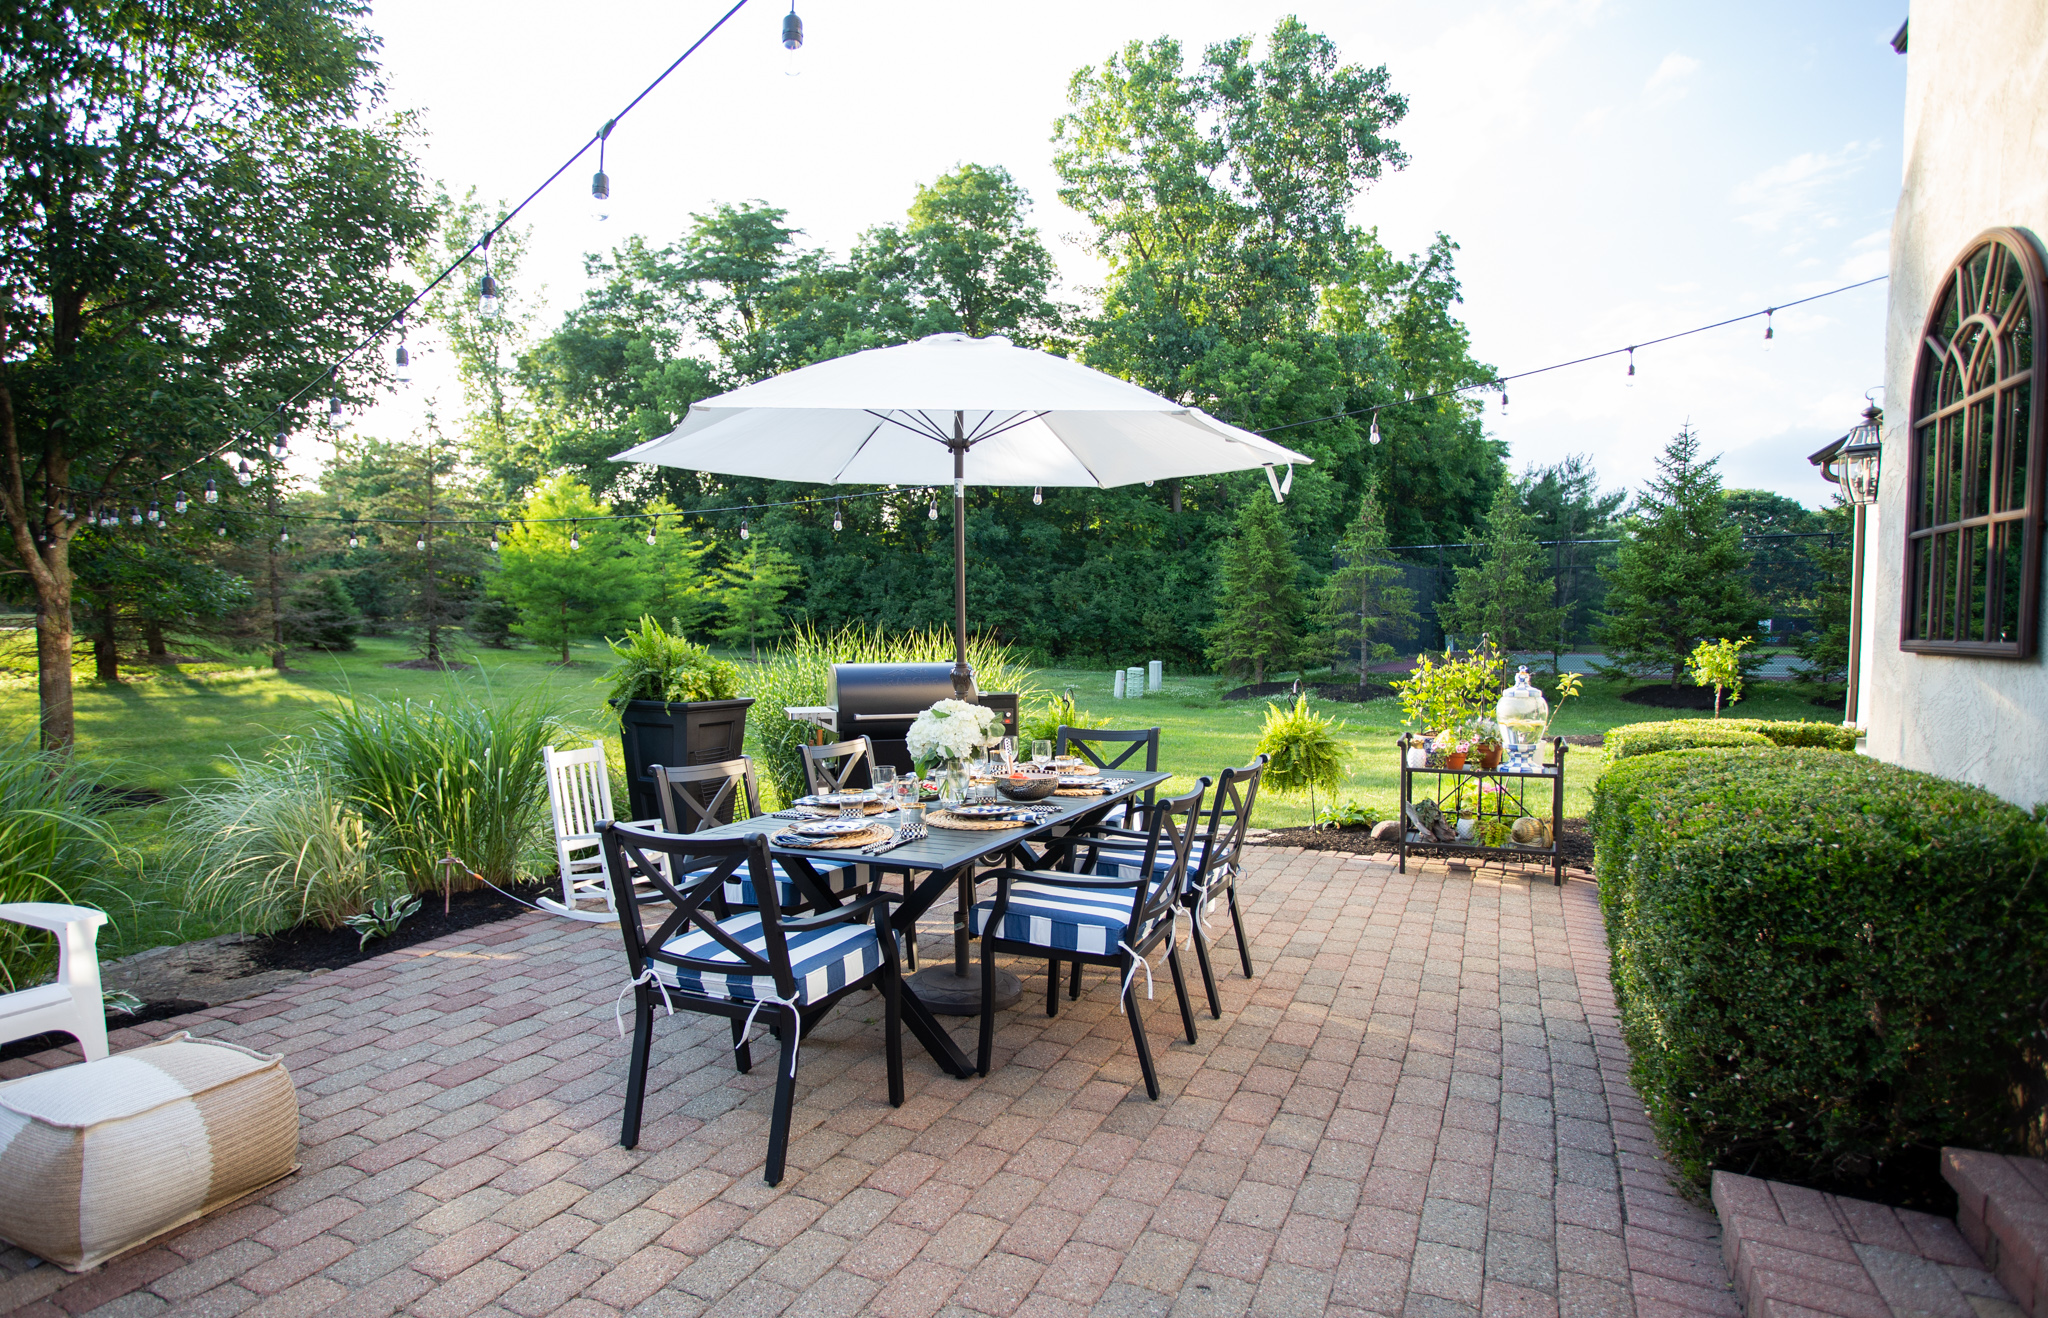 Back Patio by popular Ohio life and style blog, Coffee Beans and Bobby Pins: image of a back patio decorated with a Grandin Road Octagonal Outdoor Market Umbrella, Grandin Road Piped Seat Cushion, Grandin Road Baxter Outdoor Lantern, Grandin Road Nantucket Tall Tapered Planter and a black outdoor dining table and chairs. 